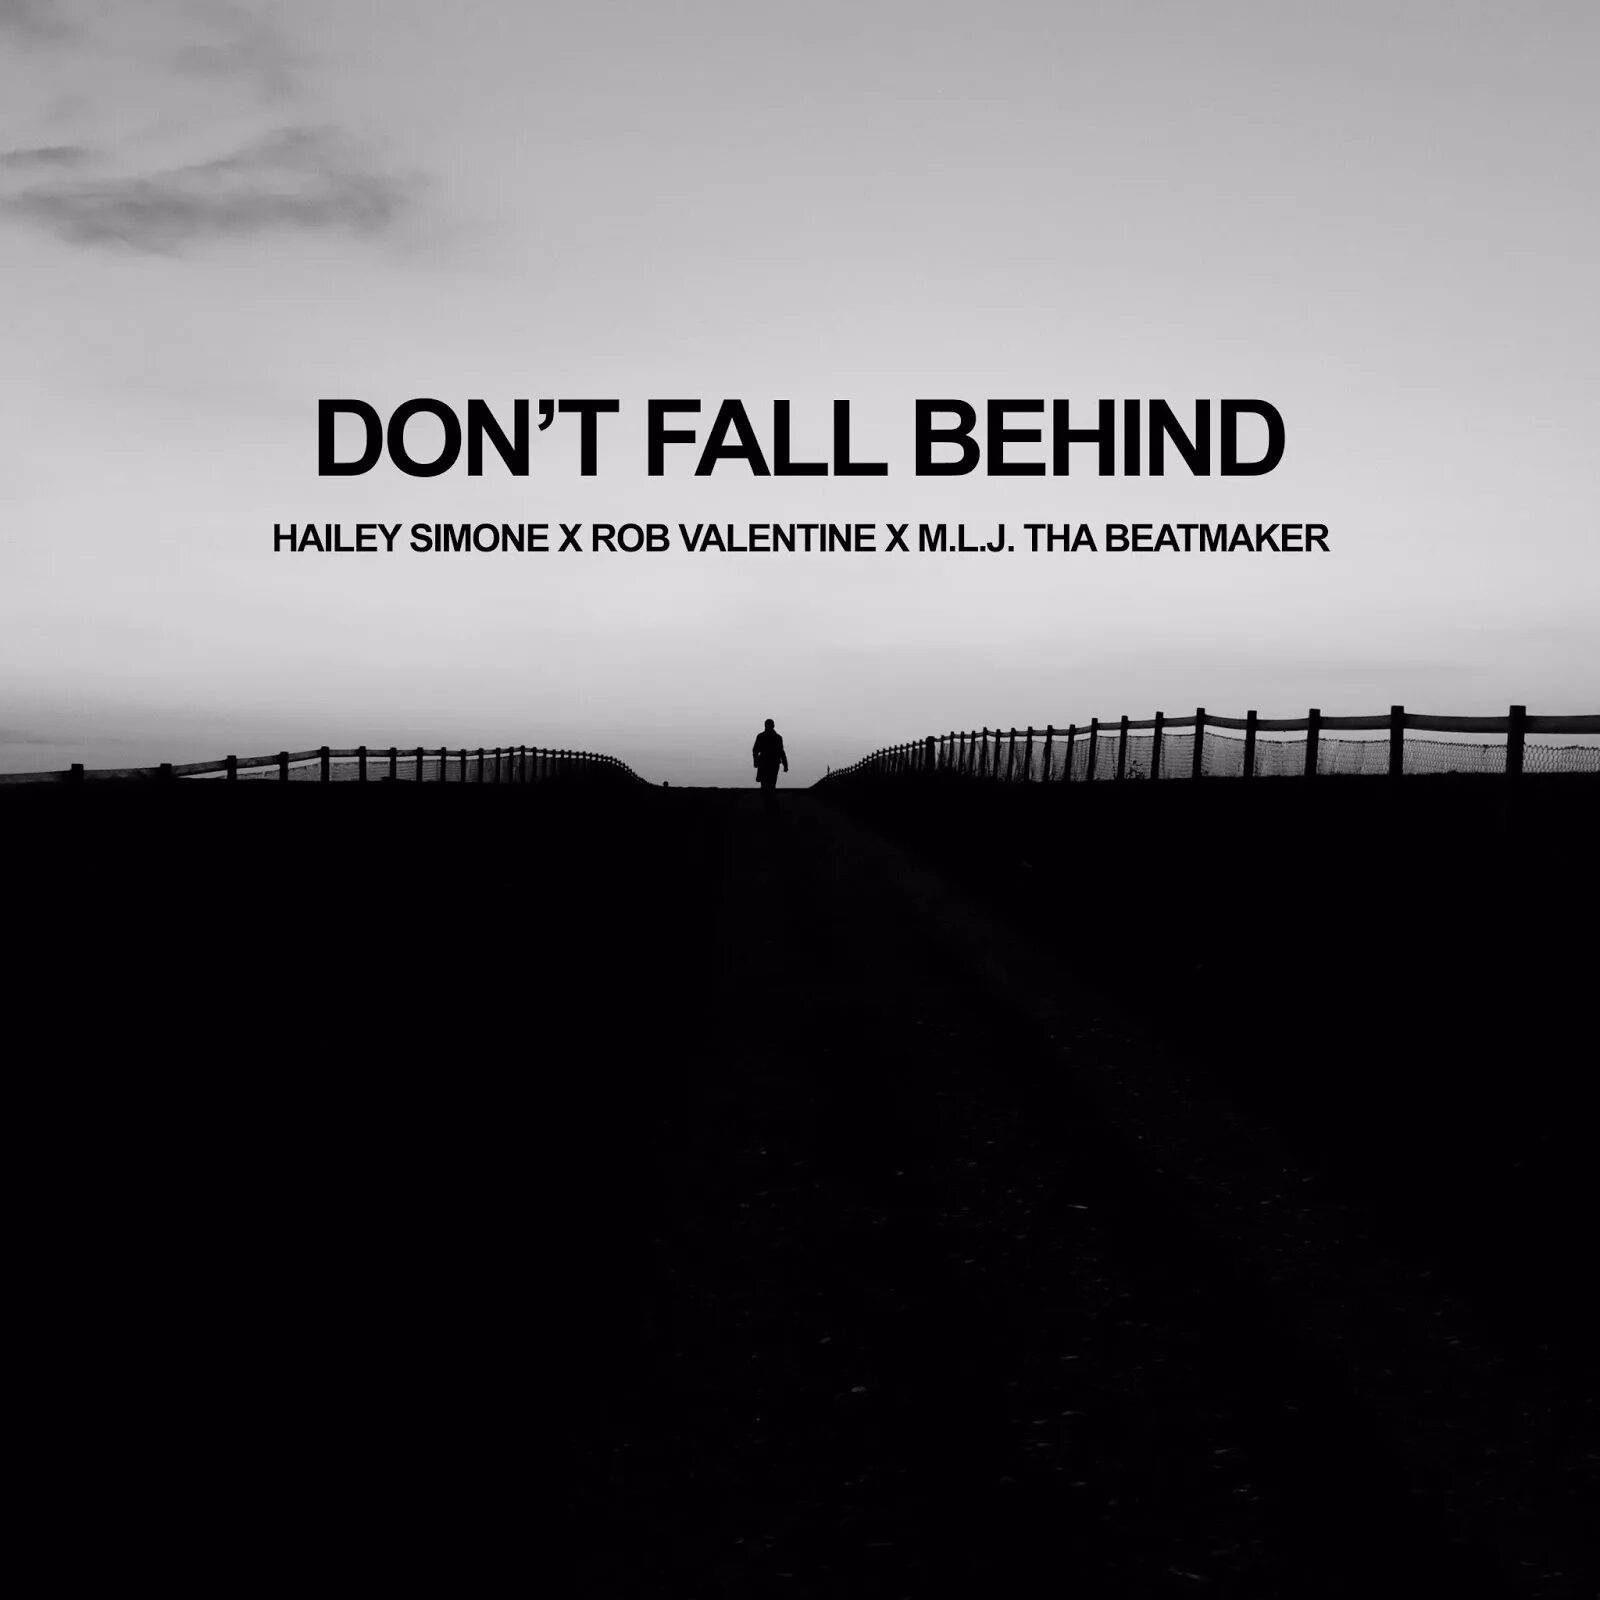 Dont fall. Fall behind. Don t Fall. Falling behind. Don't Fall behind the times background.